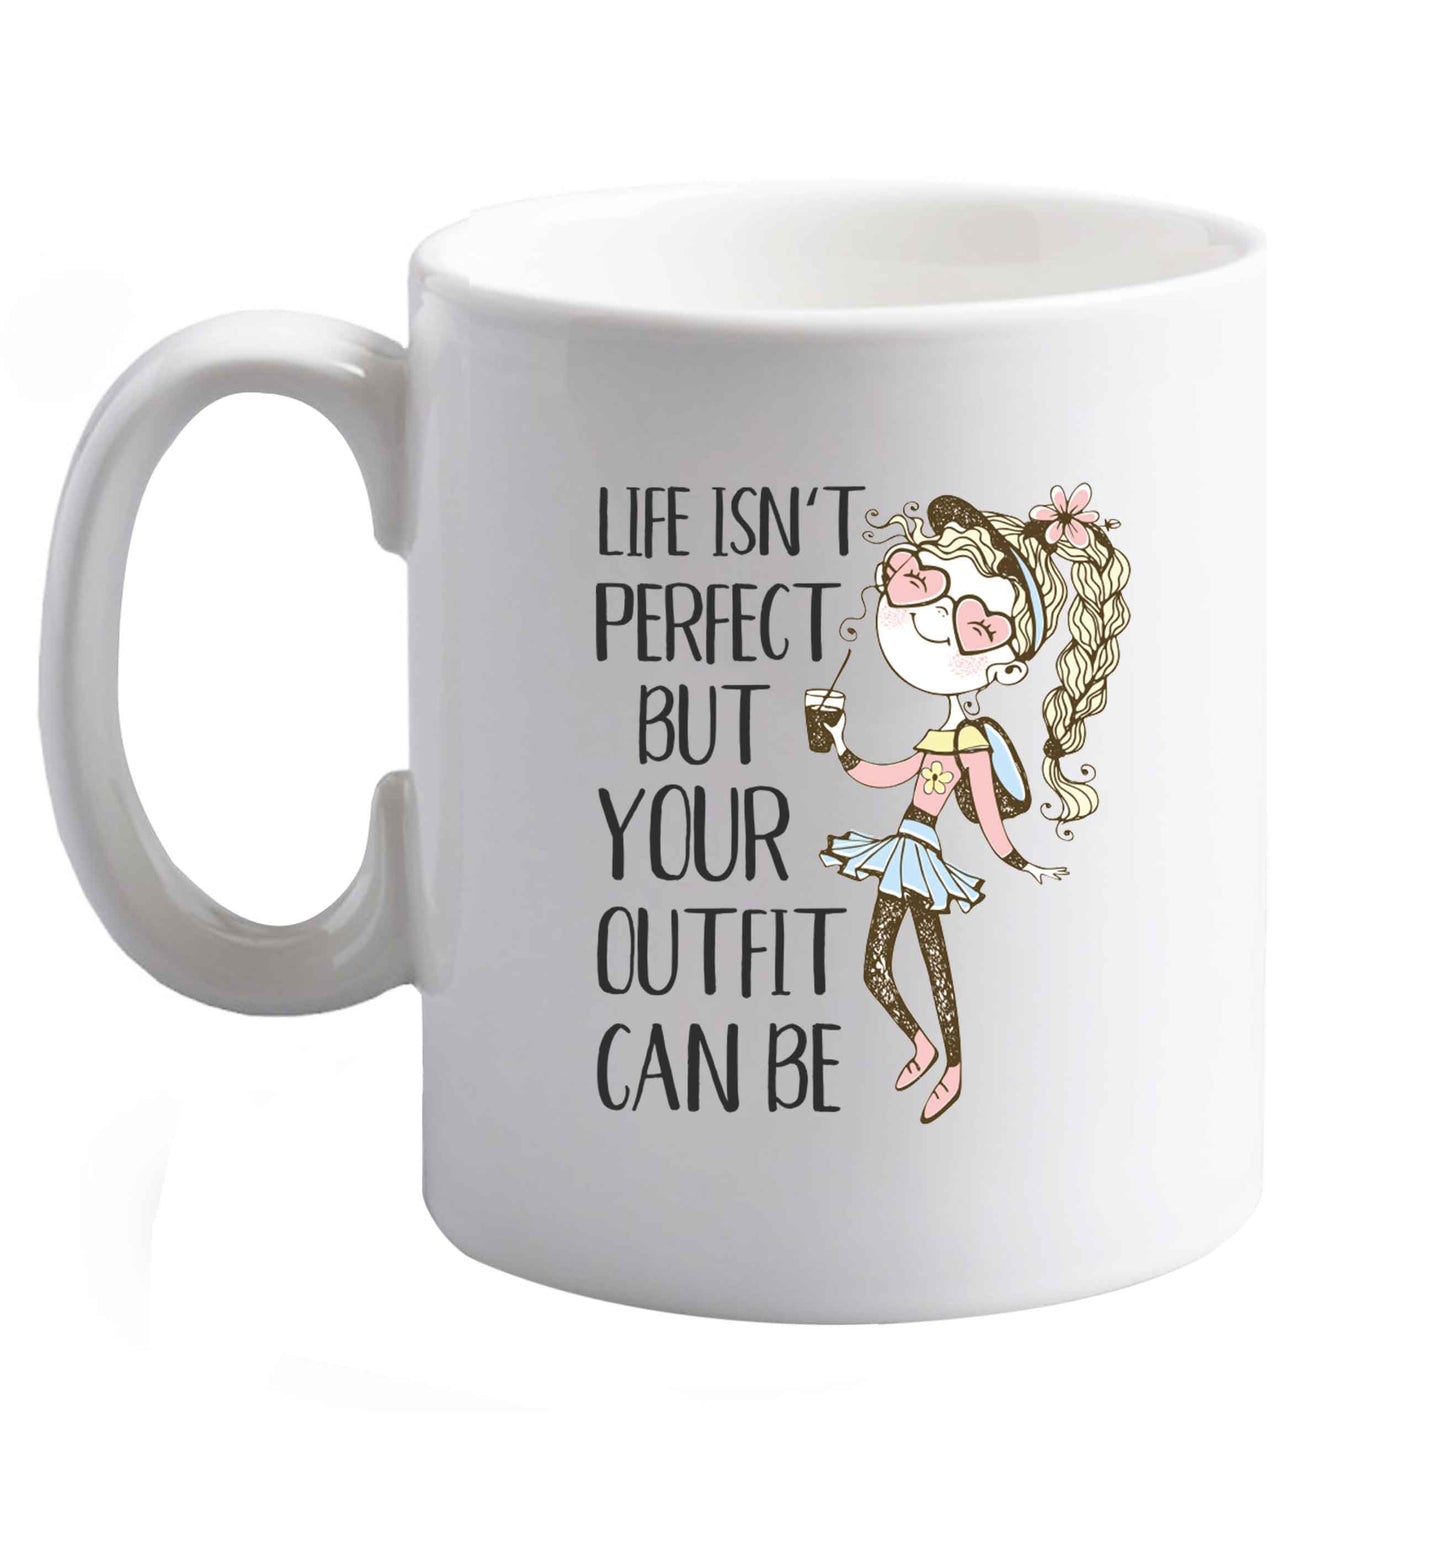 10 oz Life isn't perfect but your outfit can be illustration  ceramic mug right handed